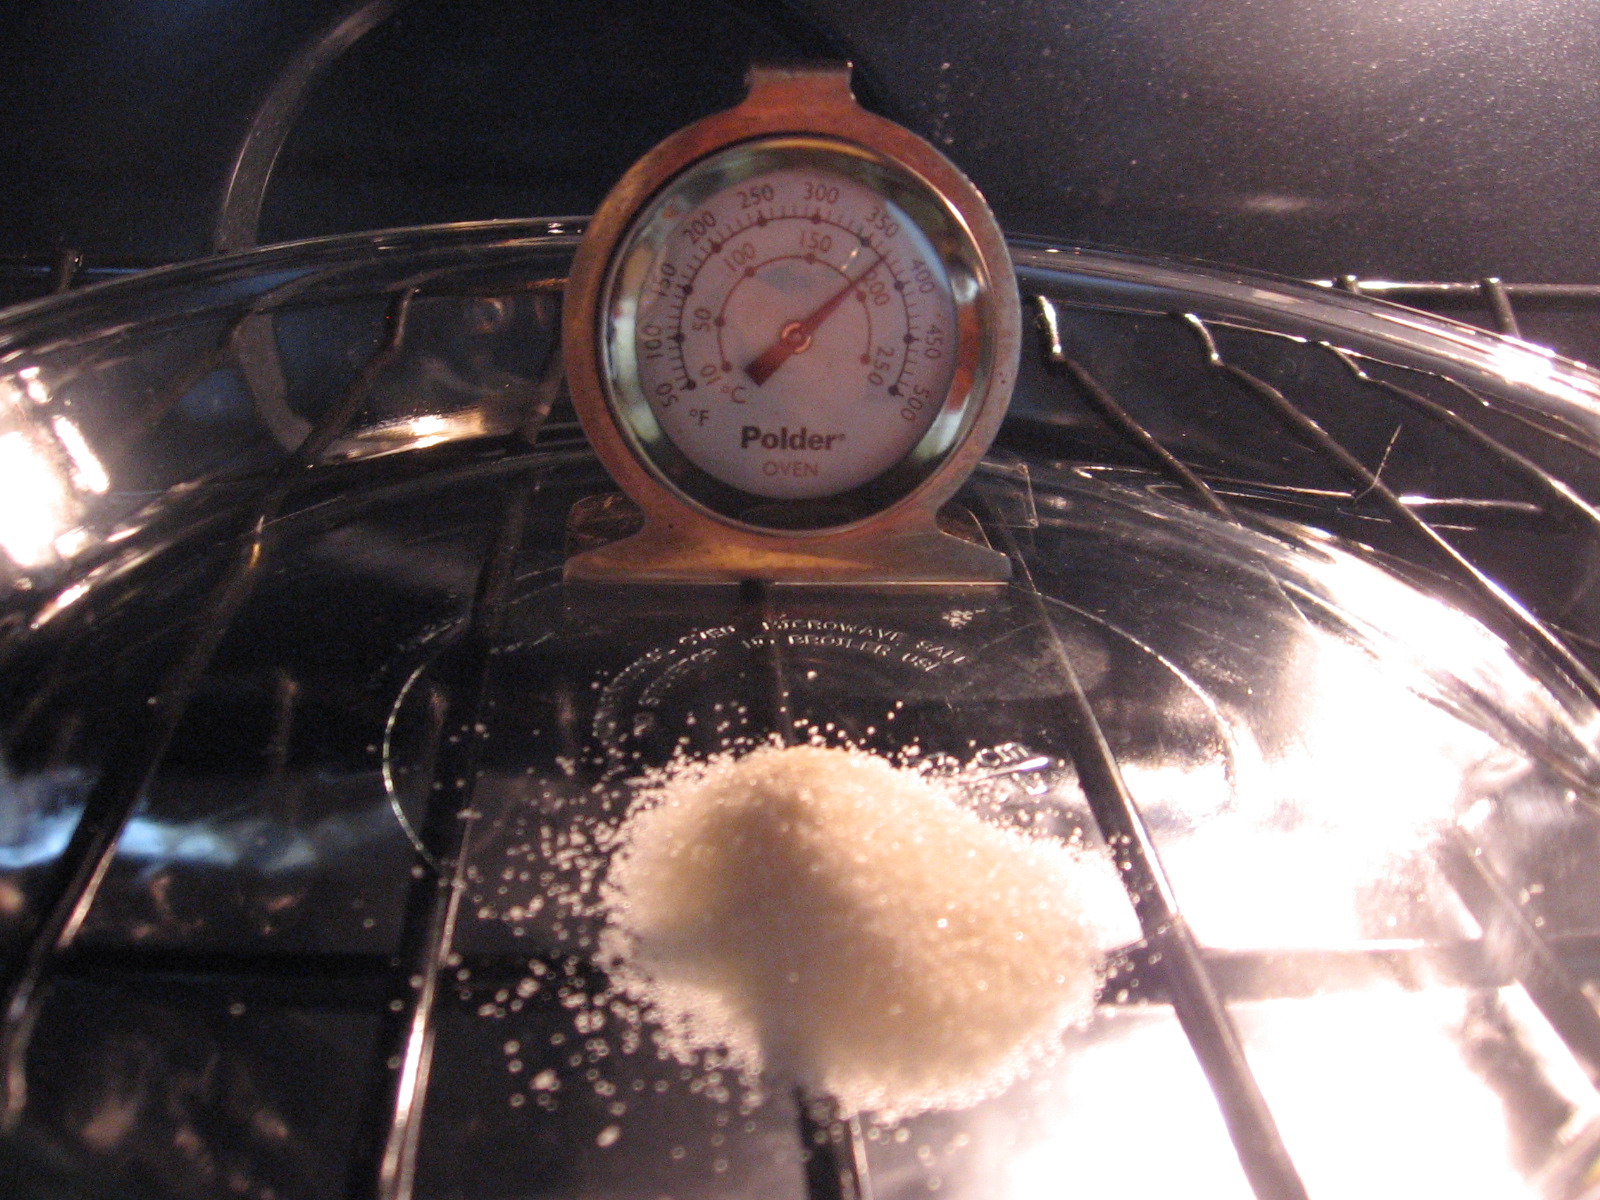 HOW TO TEST YOUR OVEN TEMPERATURE WITHOUT A THERMOMETER